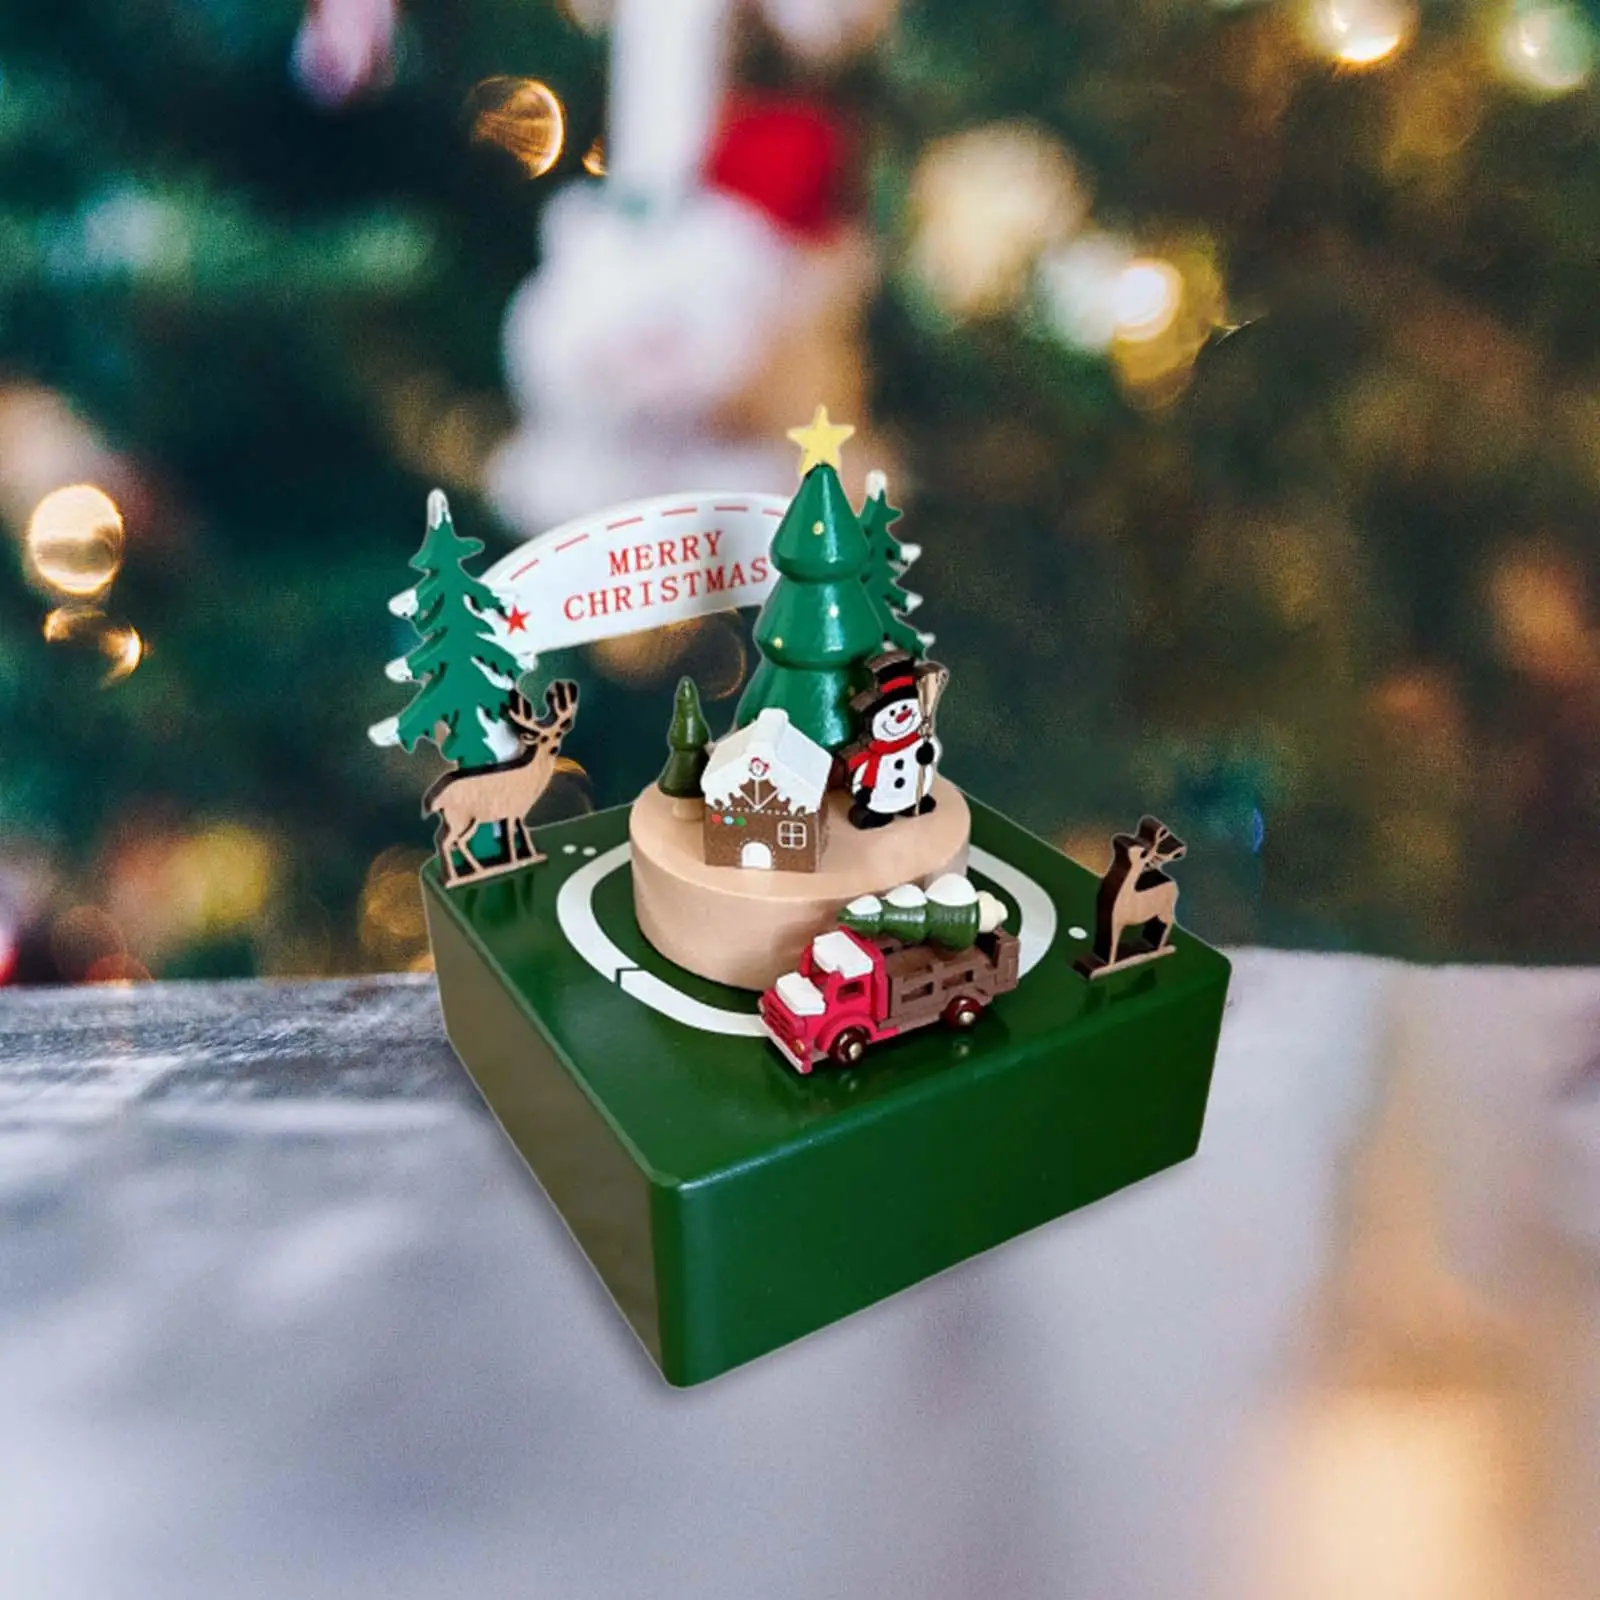 Xmas Music Box Decorative Christmas Wooden Musical Boxes Home Decoration Accessories for Bedroom Living Room Festivals Desk Home